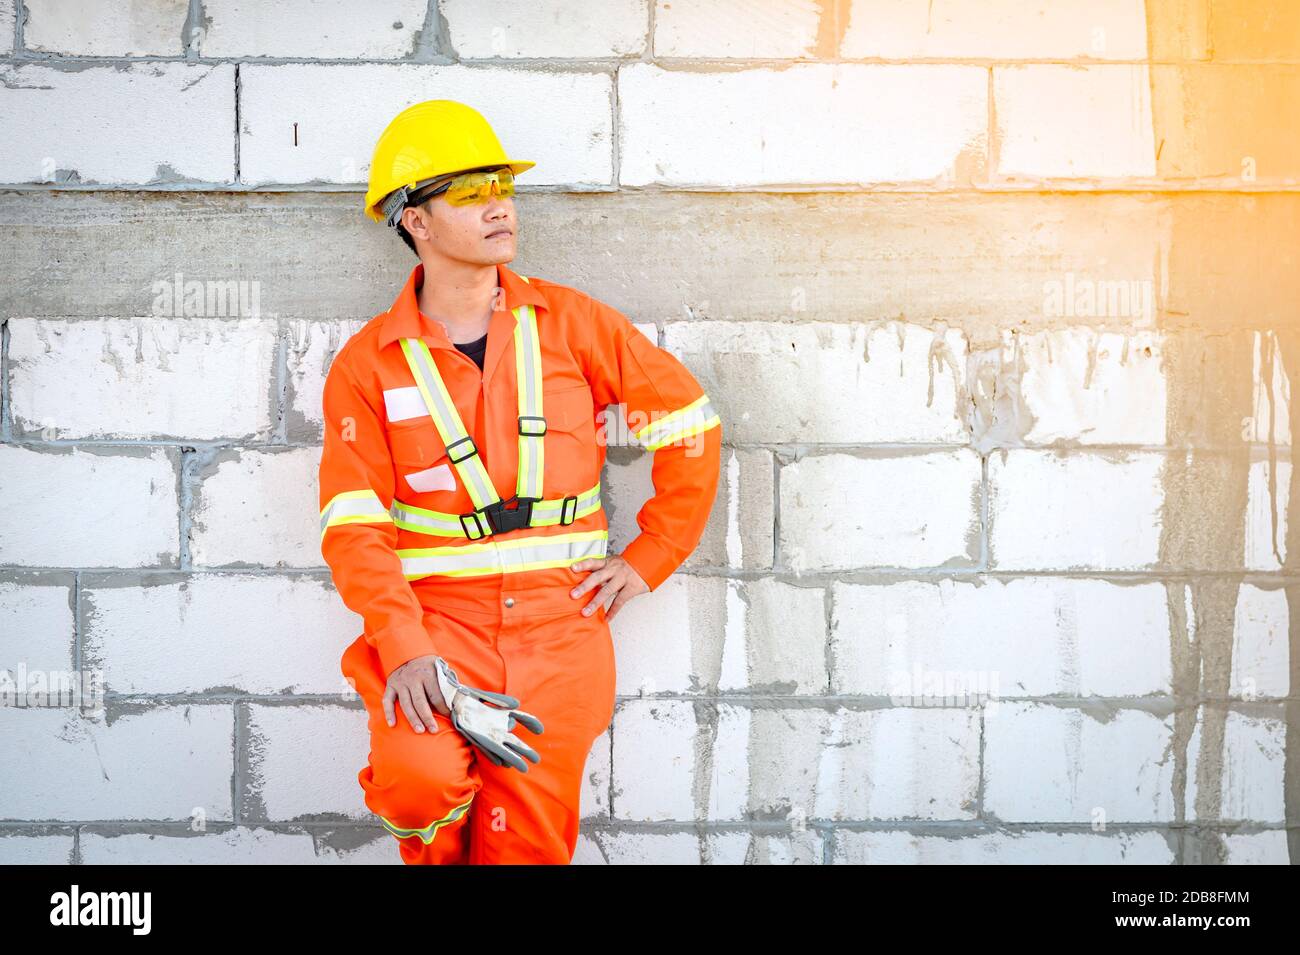 Portrait of a construction worker in reflective clothing leaning against a wall, Thailand Stock Photo